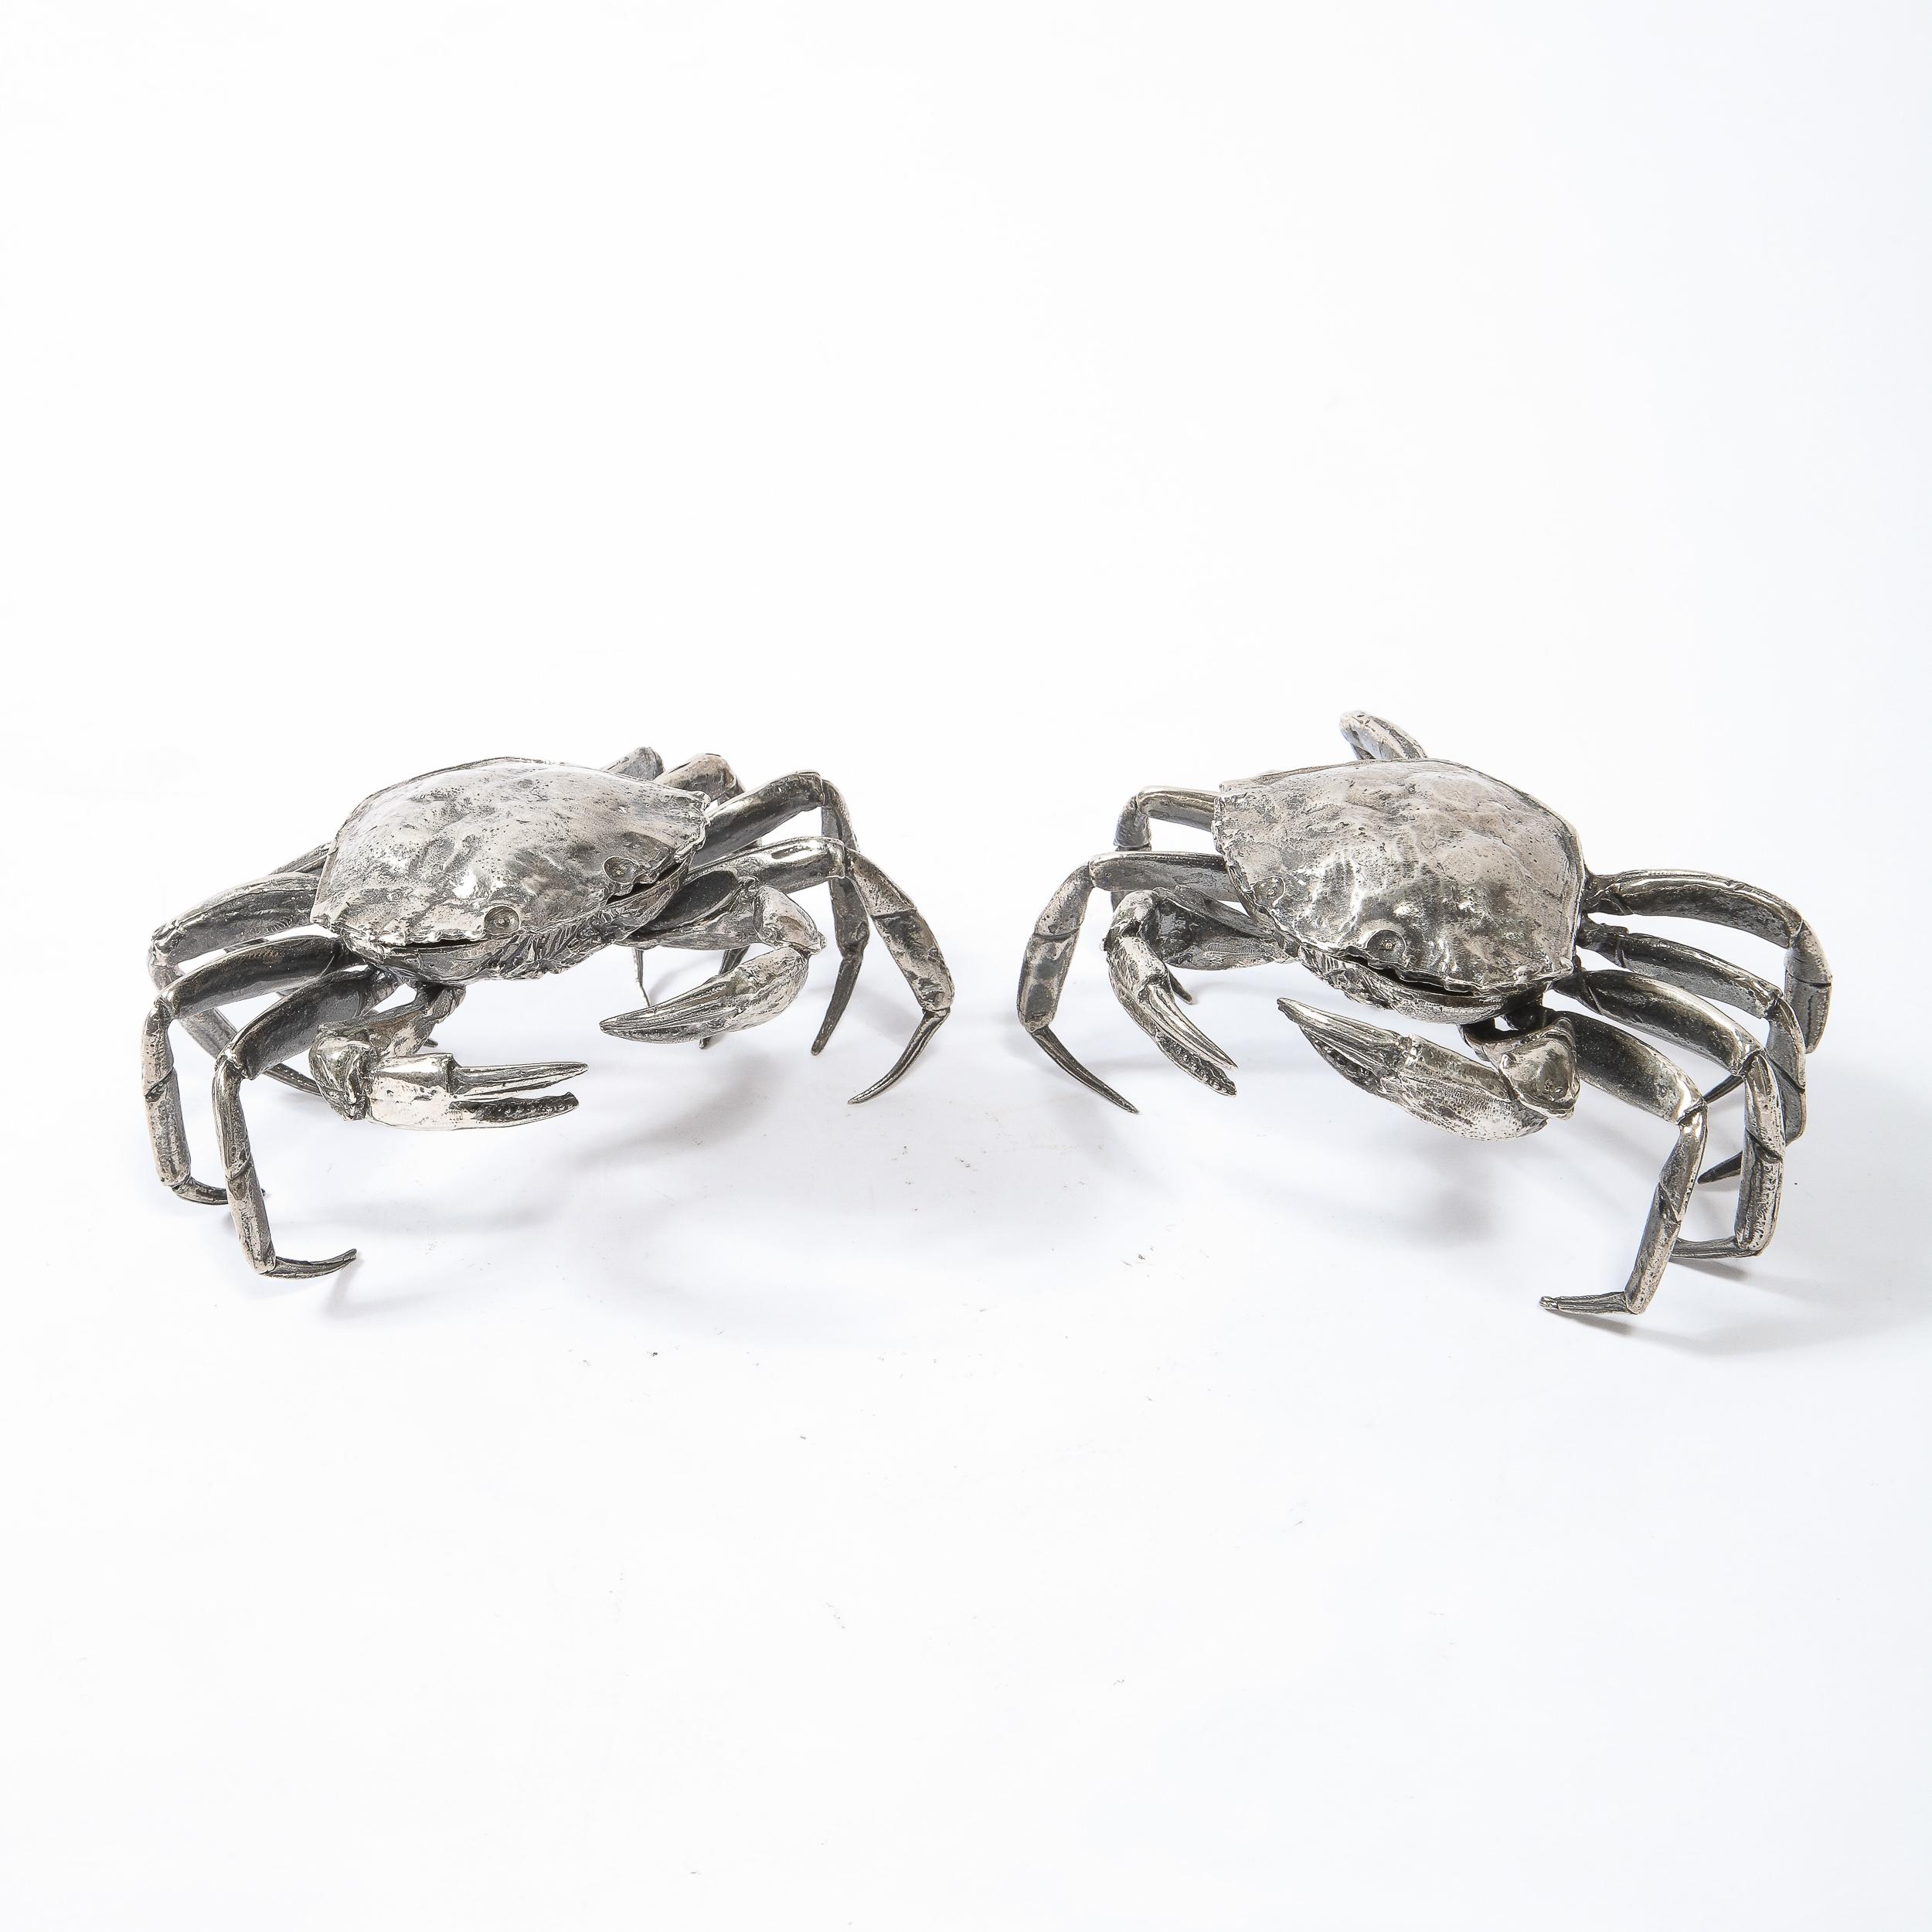 20th Century Pair of Modernist Sterling Silver Hand Wrought Stylized Crab Salt Cellars